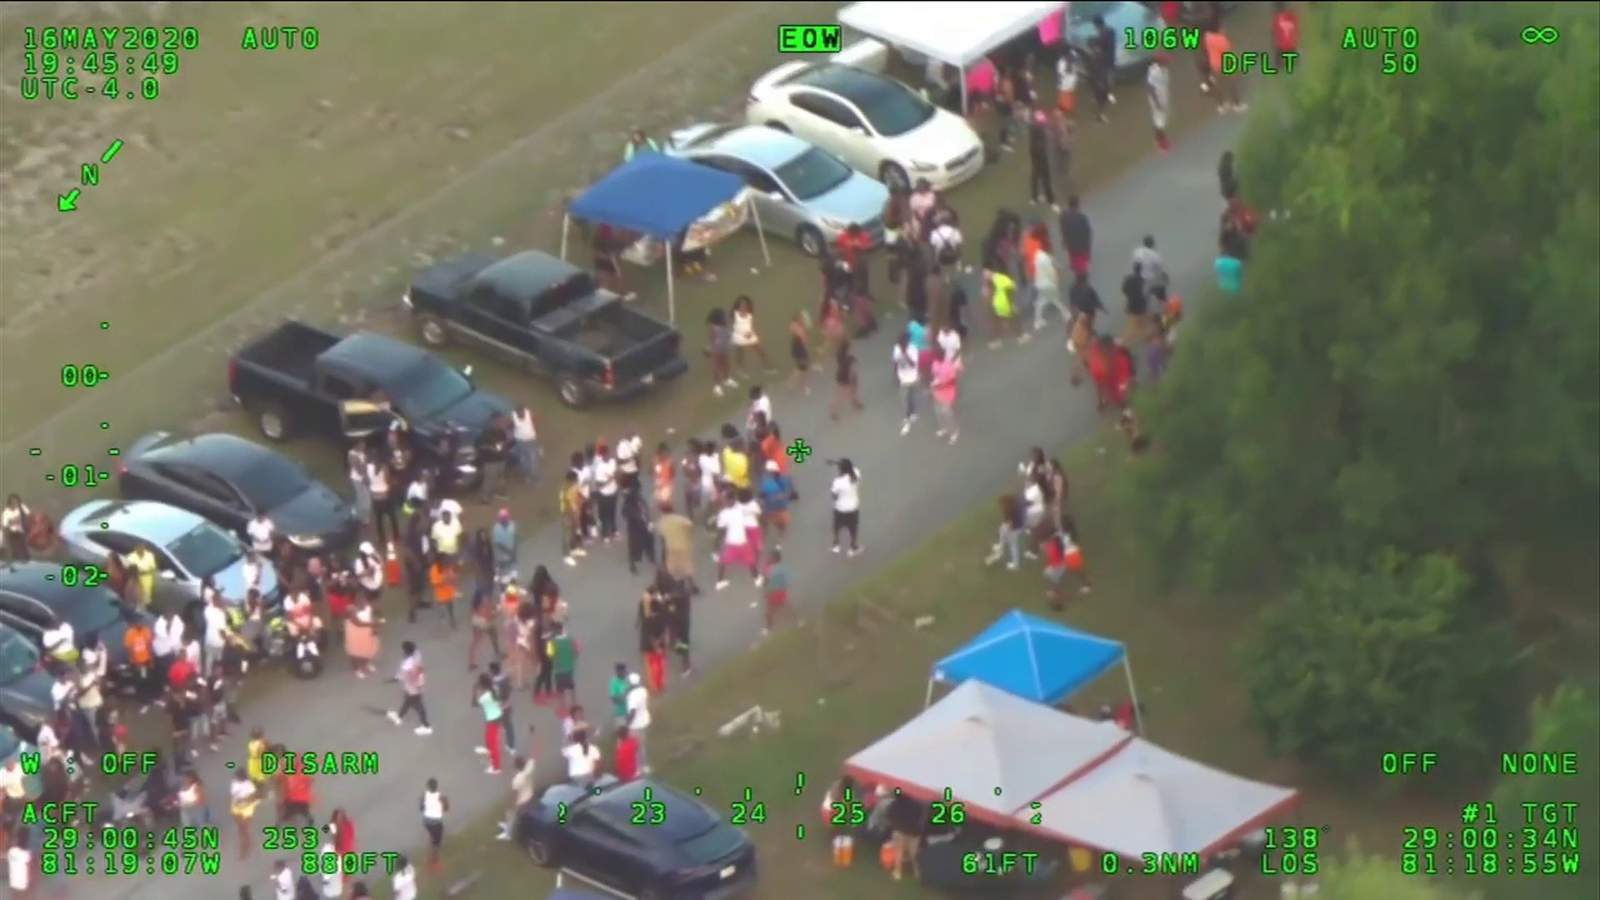 Deputies hit by bottles at massive block party in Volusia County